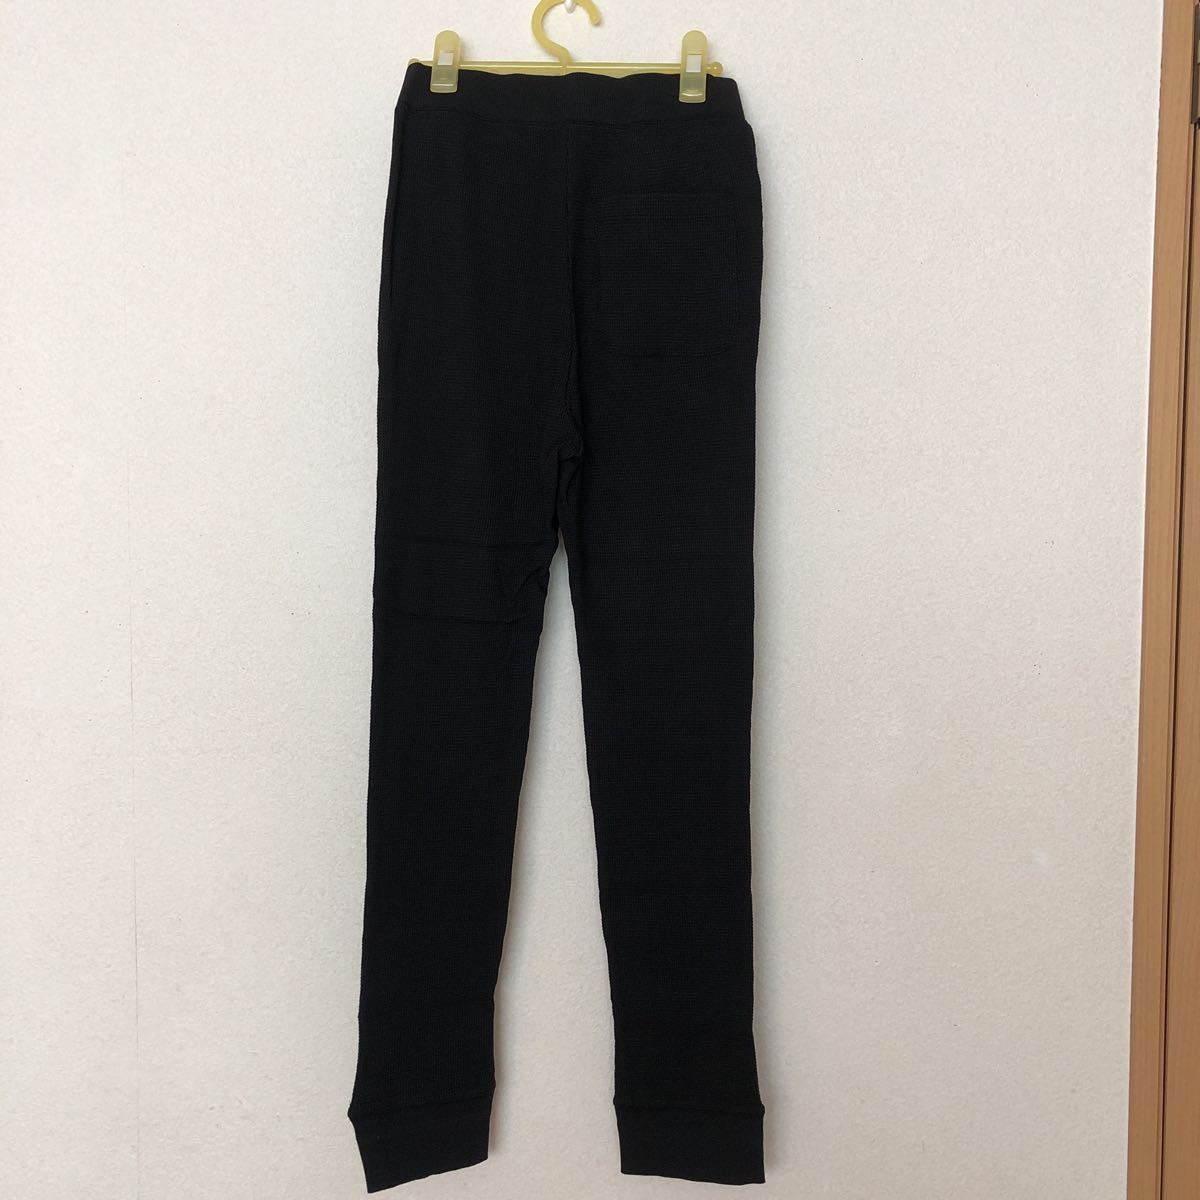  unused Johnbull regular price 7480 jpy cotton thermal leggings black black S size spats Johnbull cotton 100% all goods free shipping lady's 